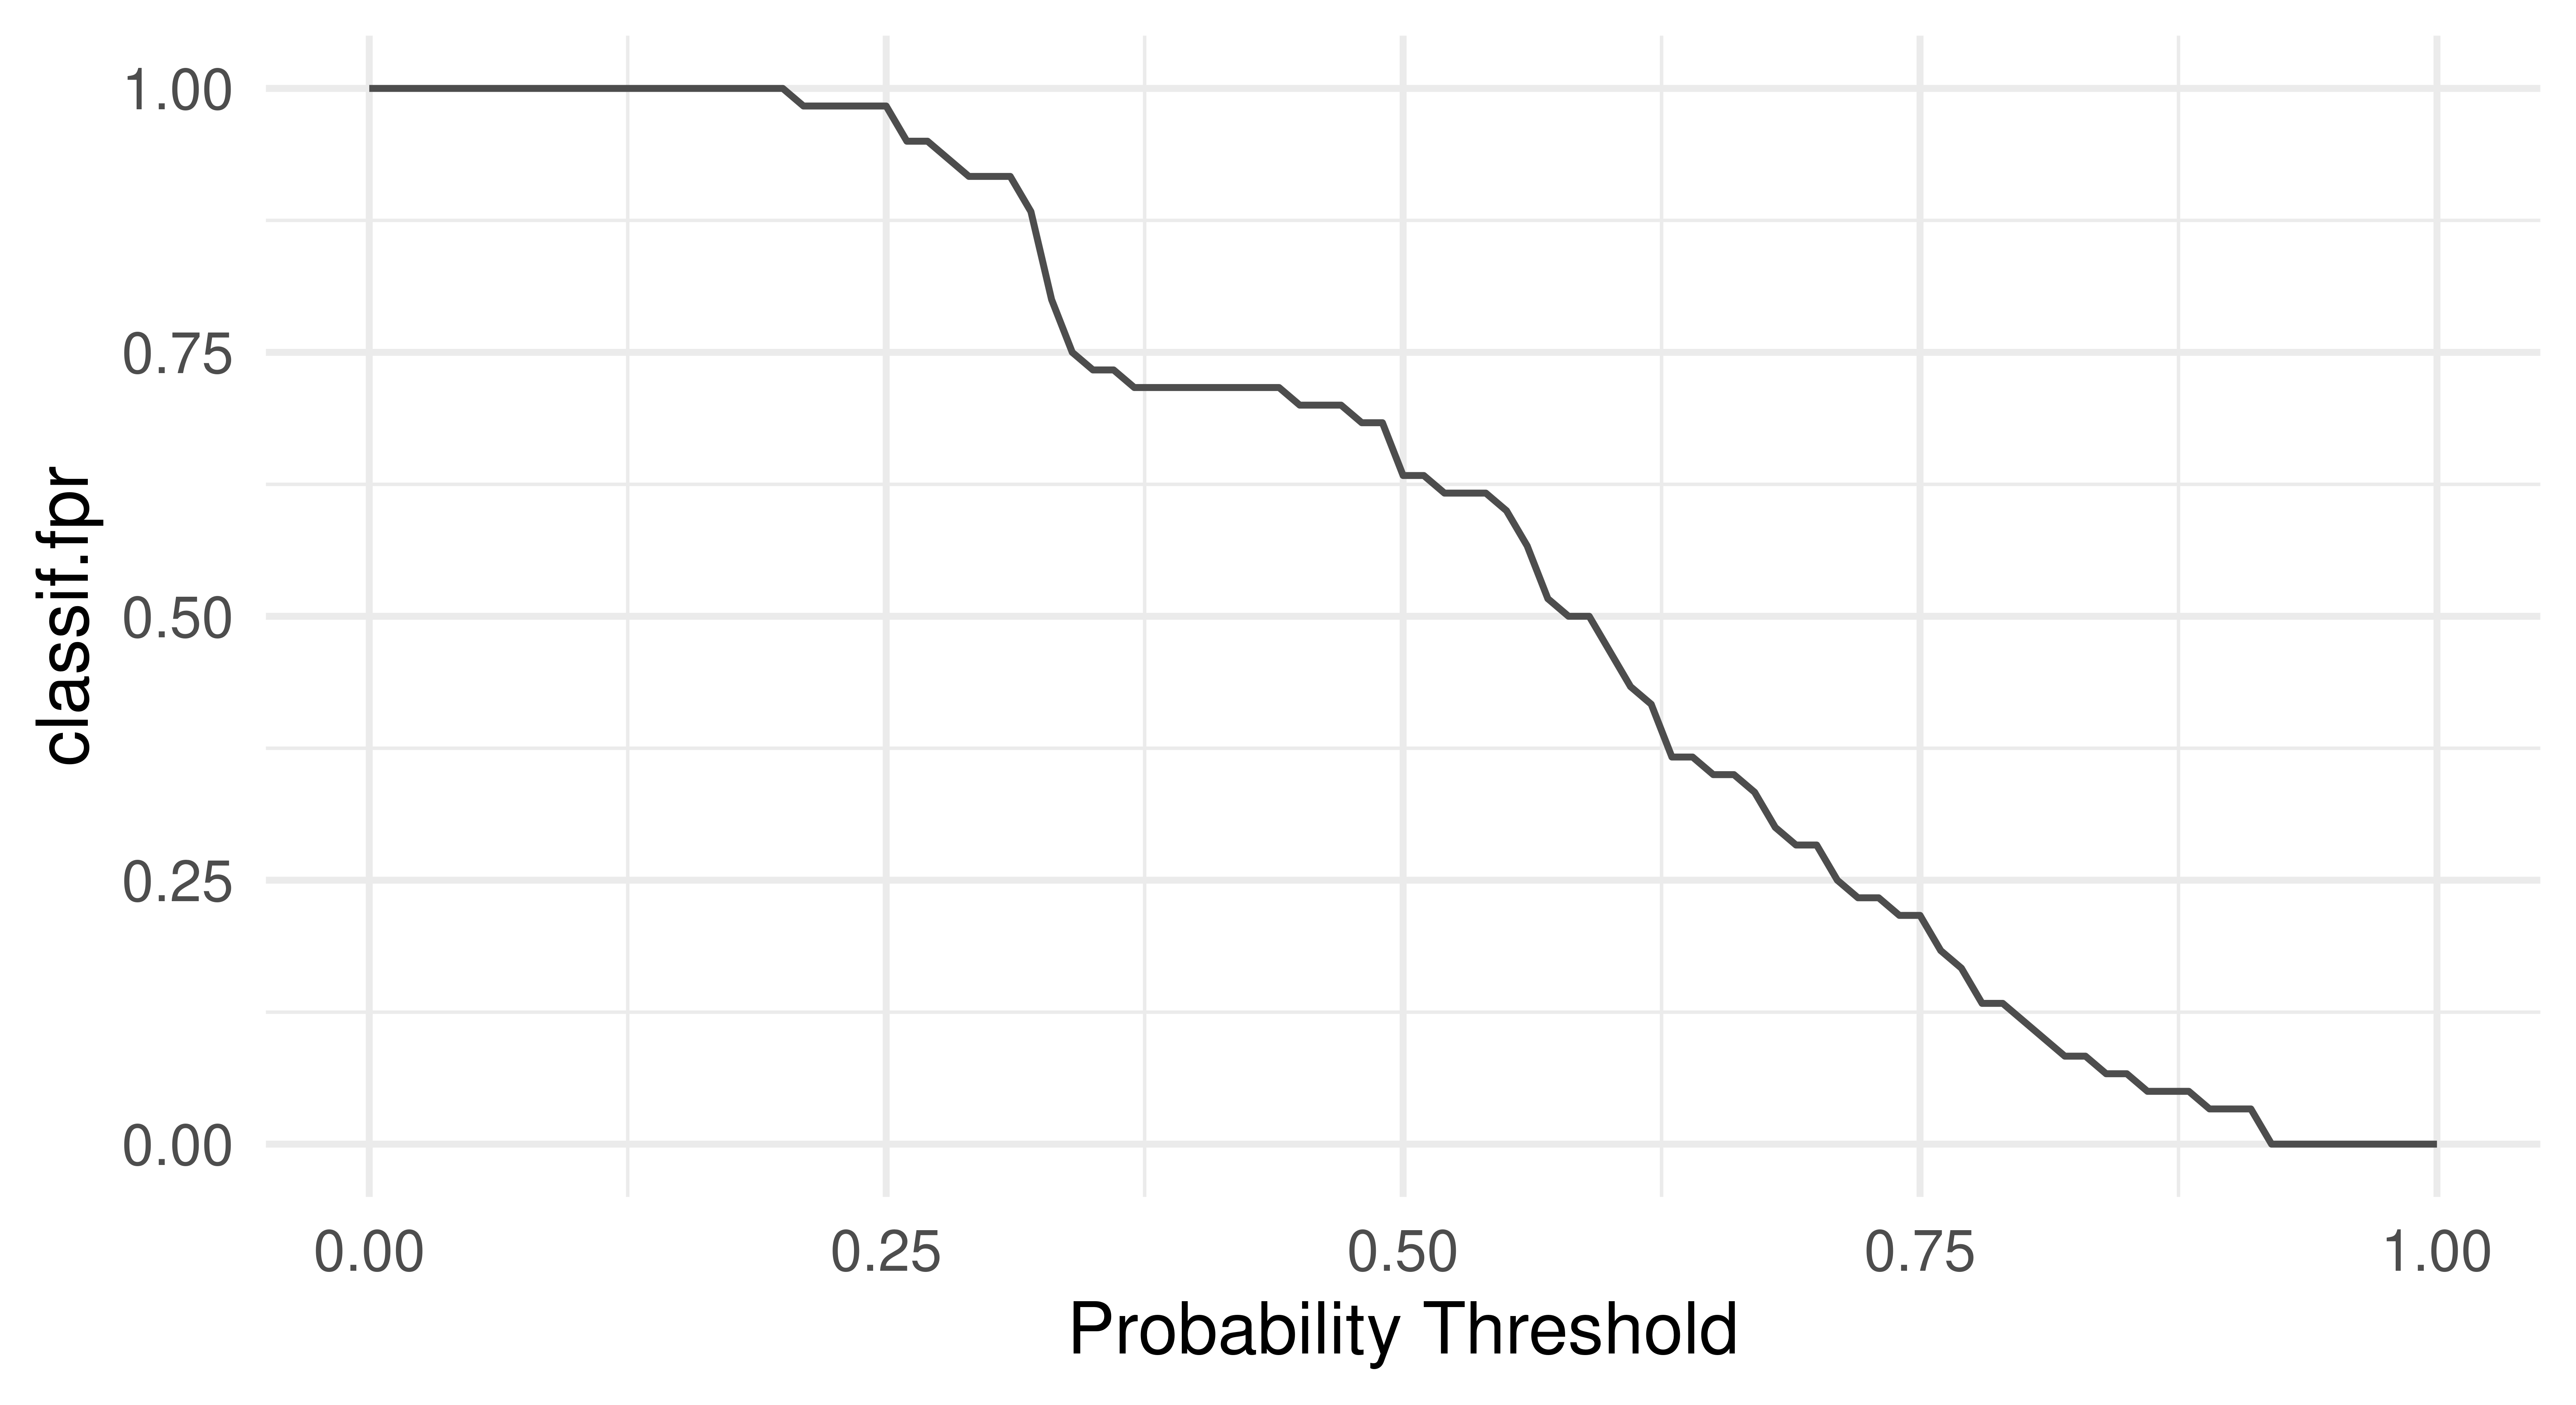 Two line graphs, both with "Probability Threshold" on x-axis from 0-1. Left: "classif.fpr" on y-axis. Line slowly decreases from (0,1) to (1,0). Right: "classif.acc" on y-axis. Line travels from (0,0.7) to (0.25,0.7) to (0.4,0.75) to (1, 0.3).